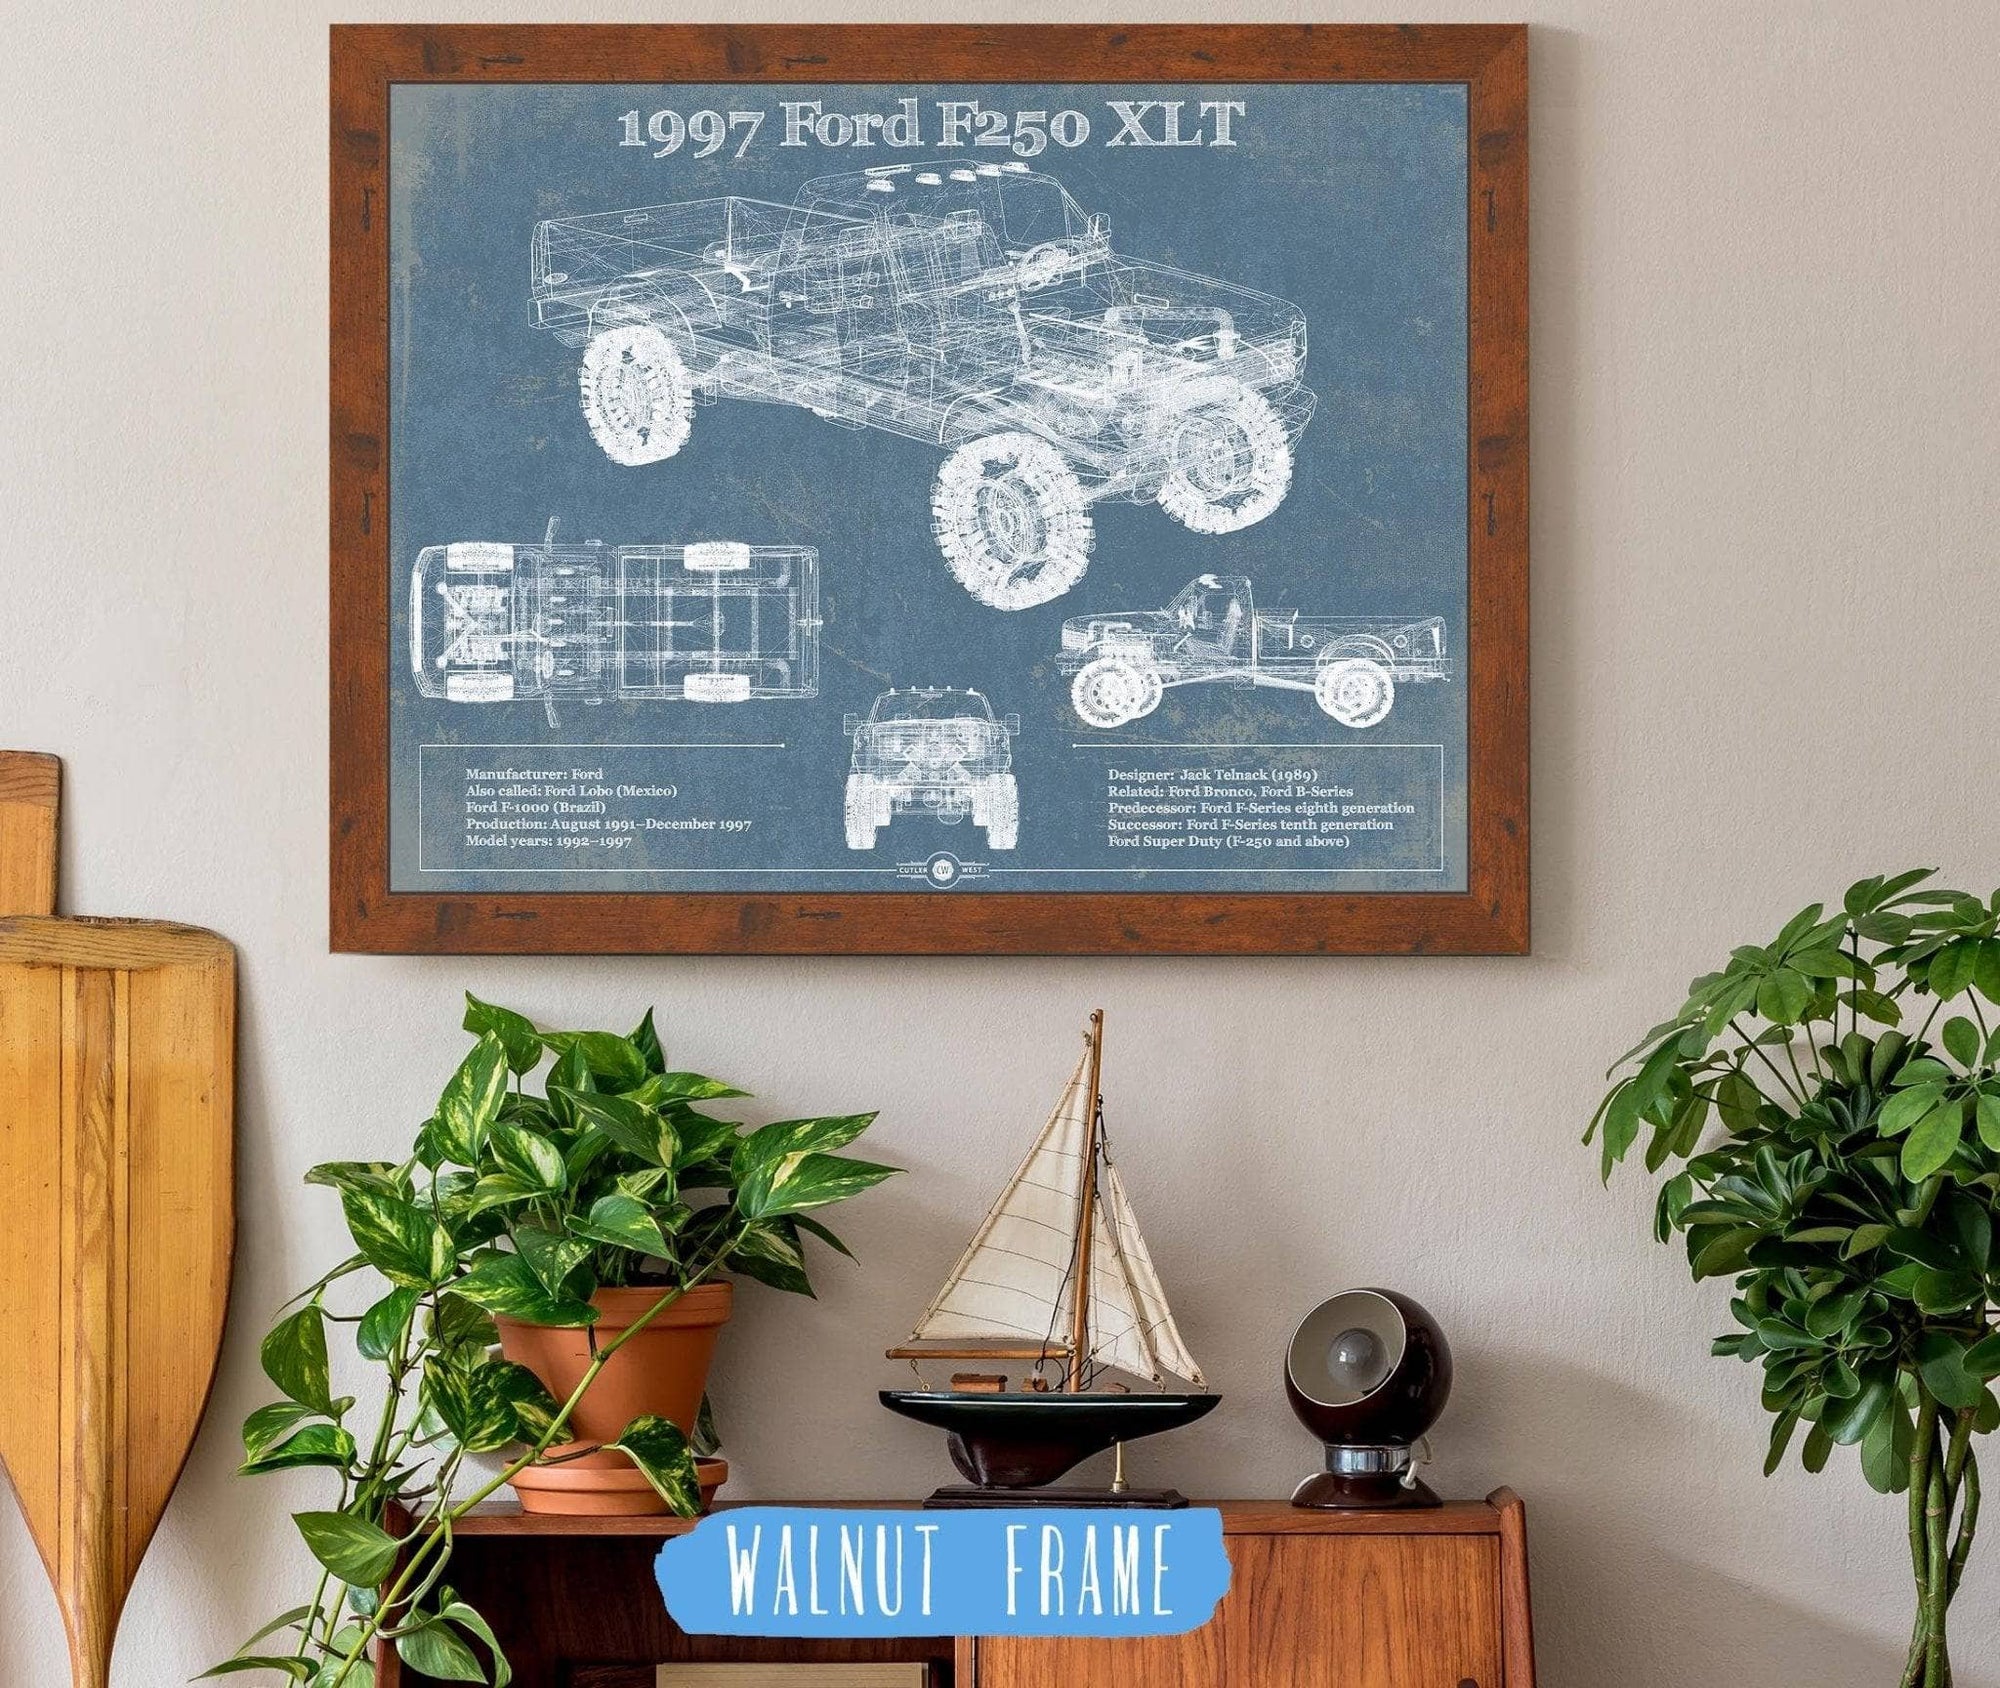 Cutler West Ford Collection 14" x 11" / Walnut Frame 1997 Ford F250 XLT Vintage Blueprint Auto Print 933311047_39434